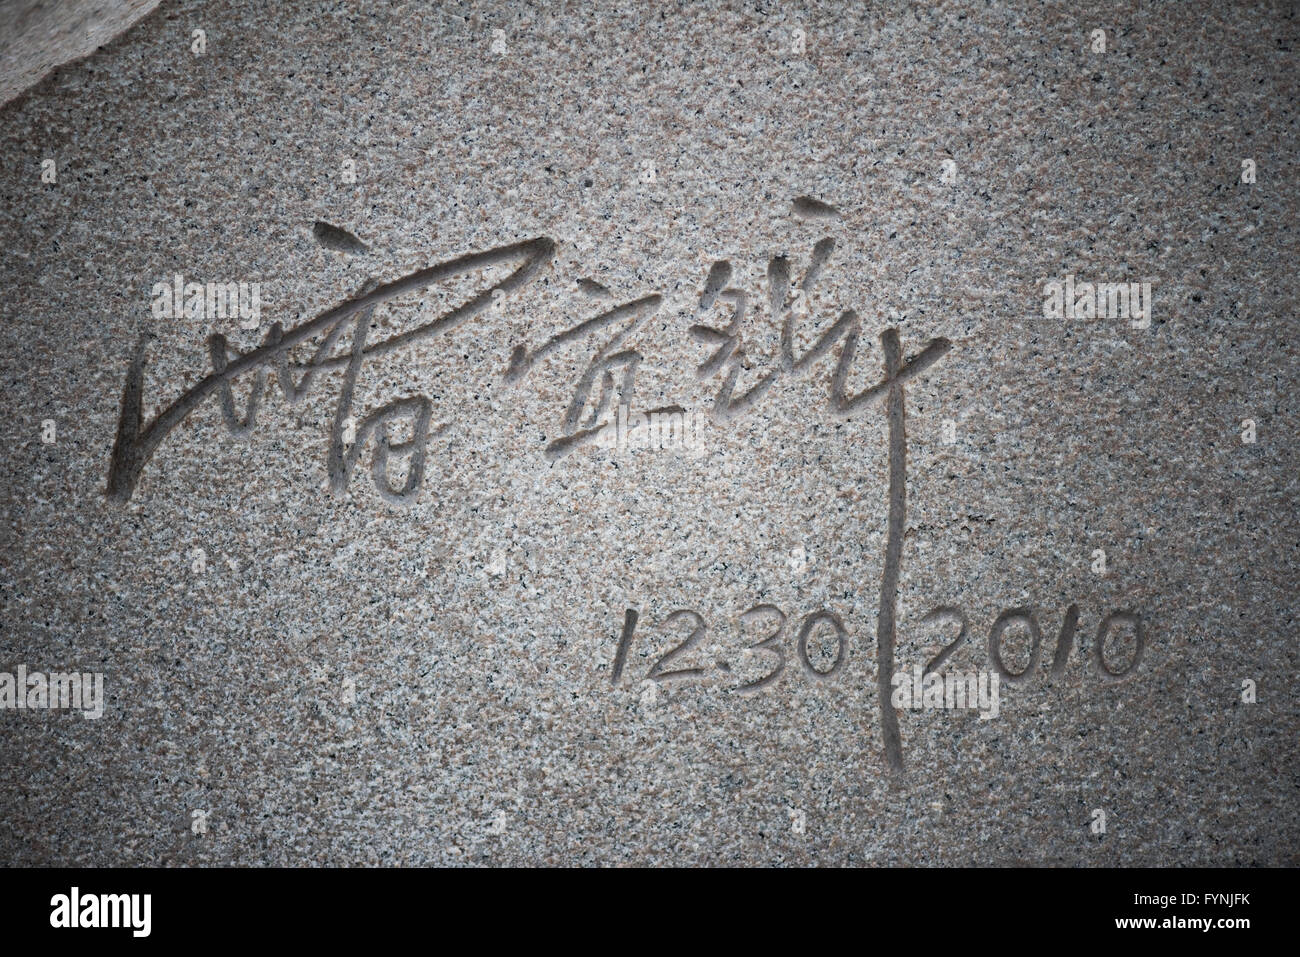 WASHINGTON, DC - The signature of sculptor Lei Yixin on the side of the main statue of the Martin Luther King Jr Memorial next to the Tidal Basin in Washington DC. Stock Photo